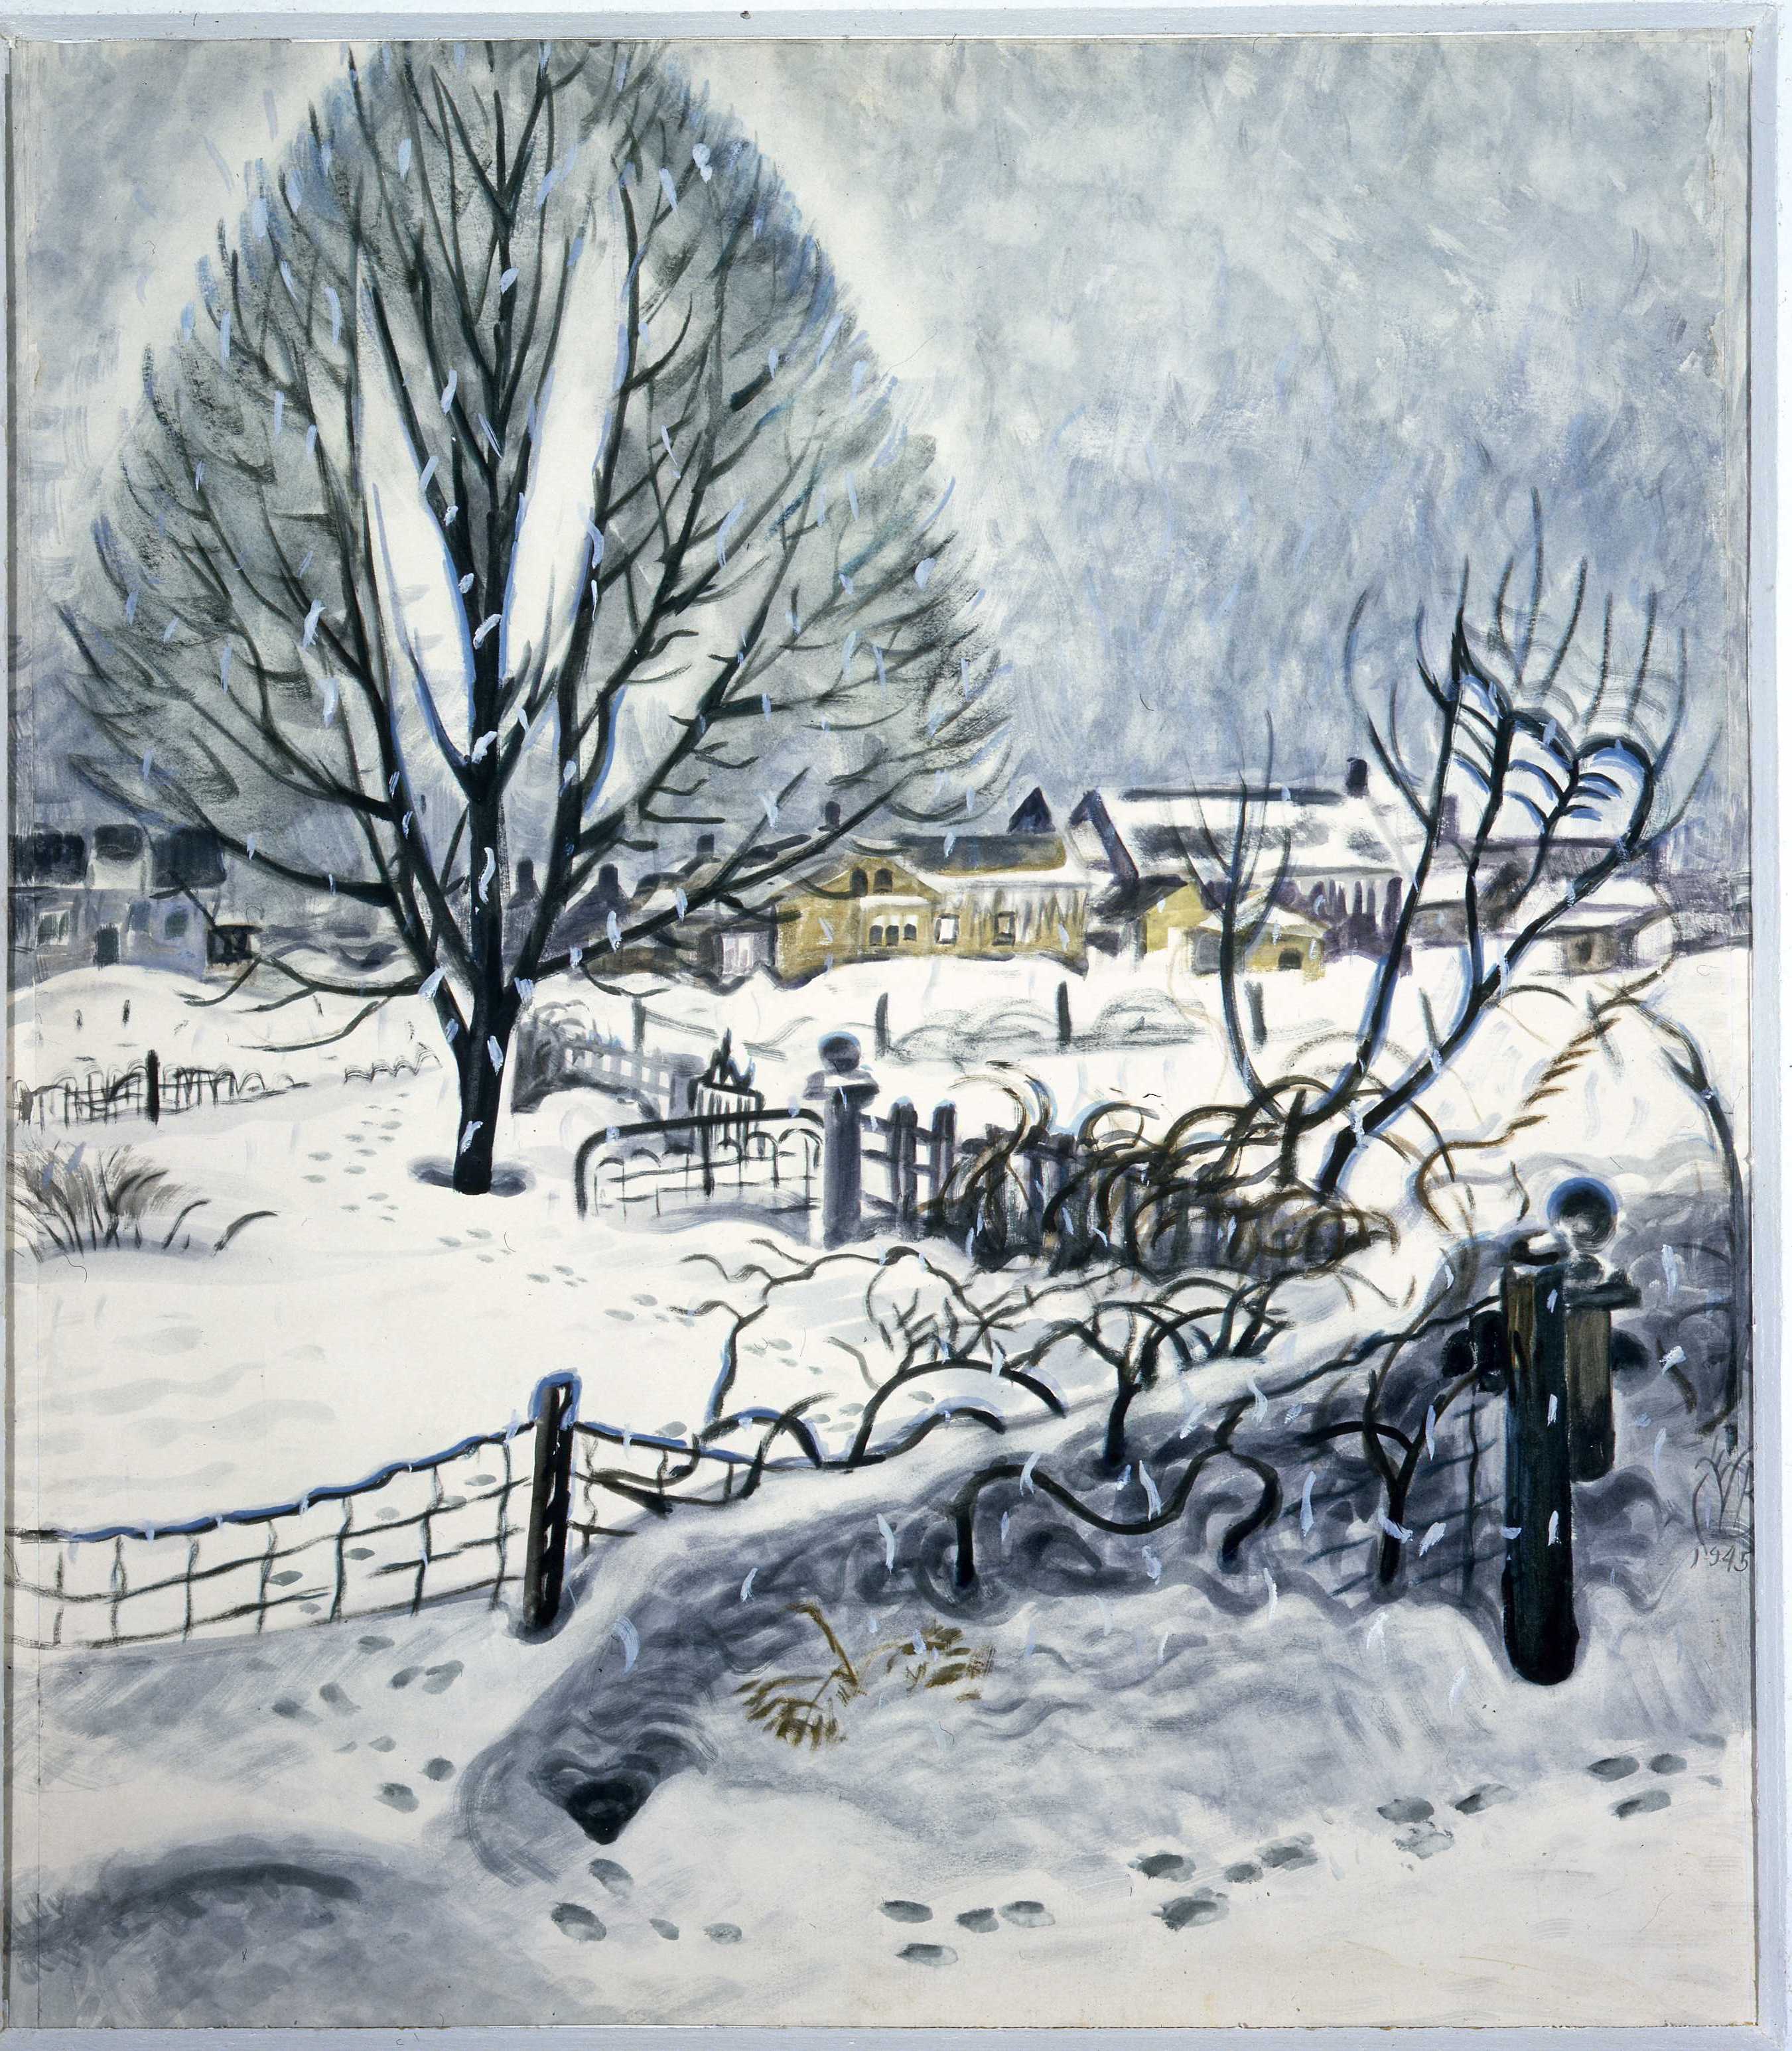 "Day in Midwinter" (1945) by Charles E. Burchfield